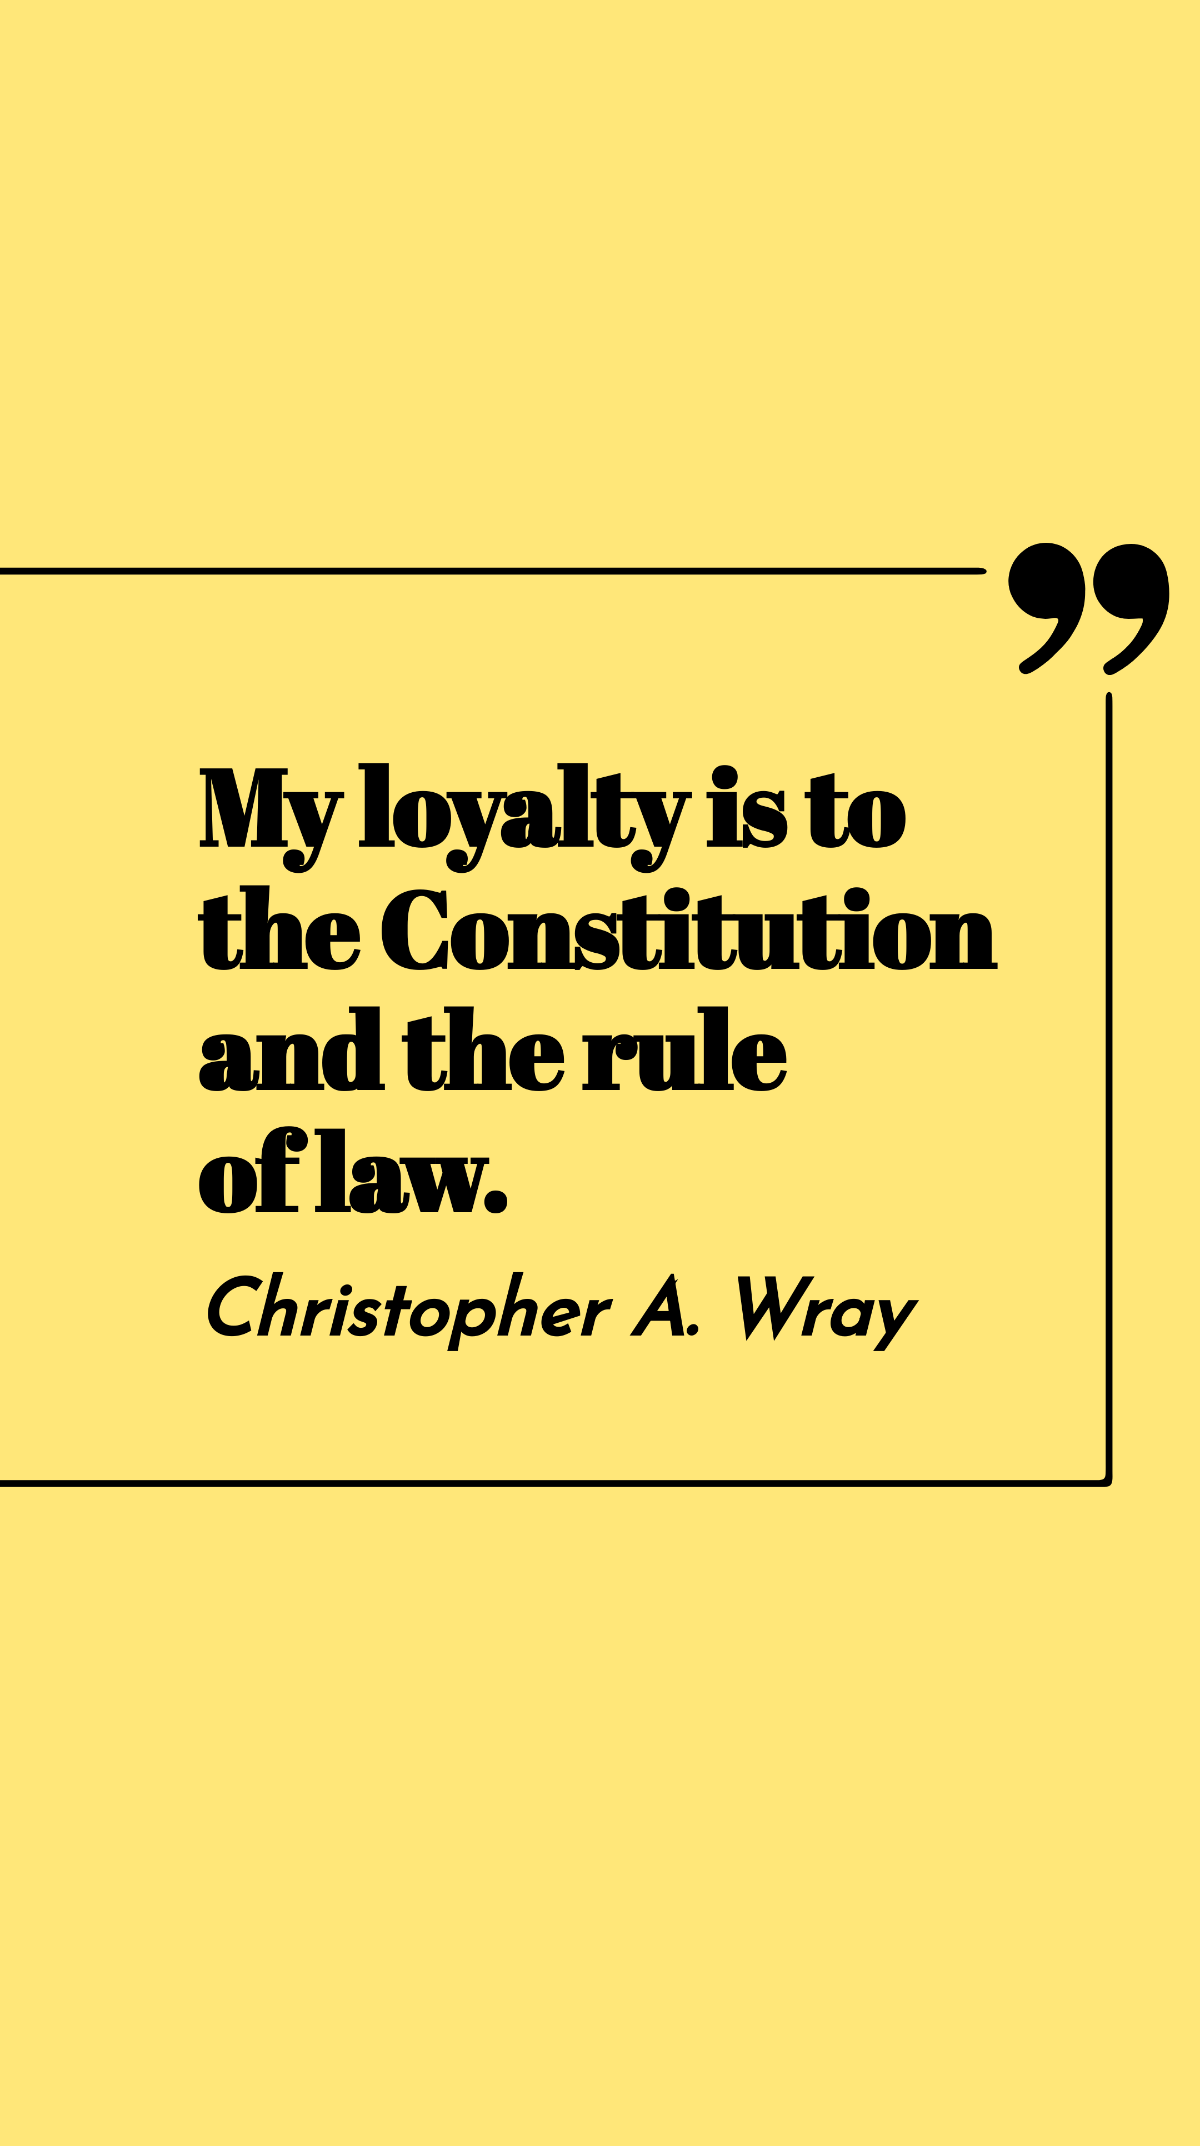 Free Christopher A. Wray - My loyalty is to the Constitution and the rule of law. Template